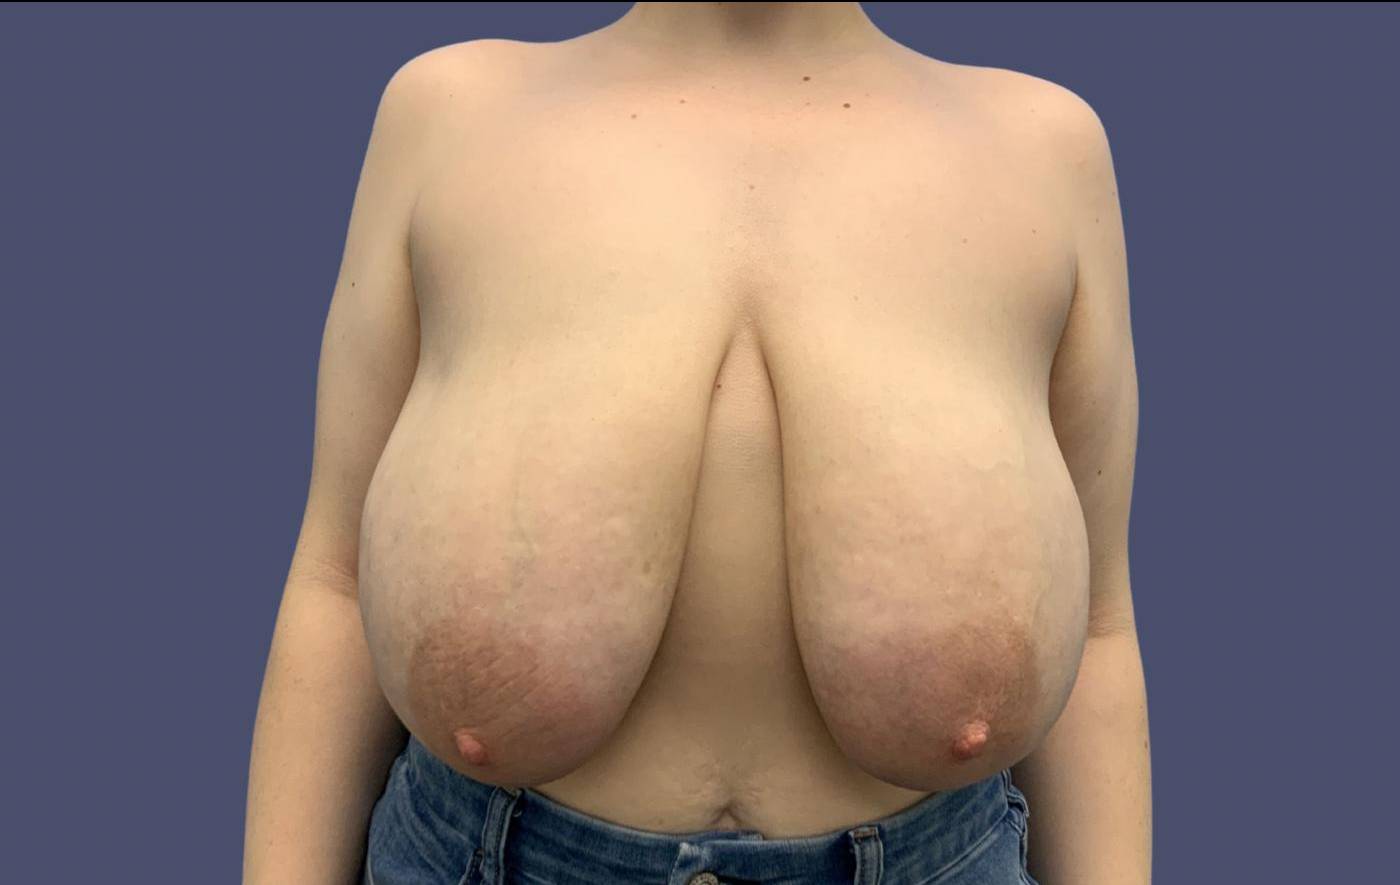 Breast Reduction 2 Before